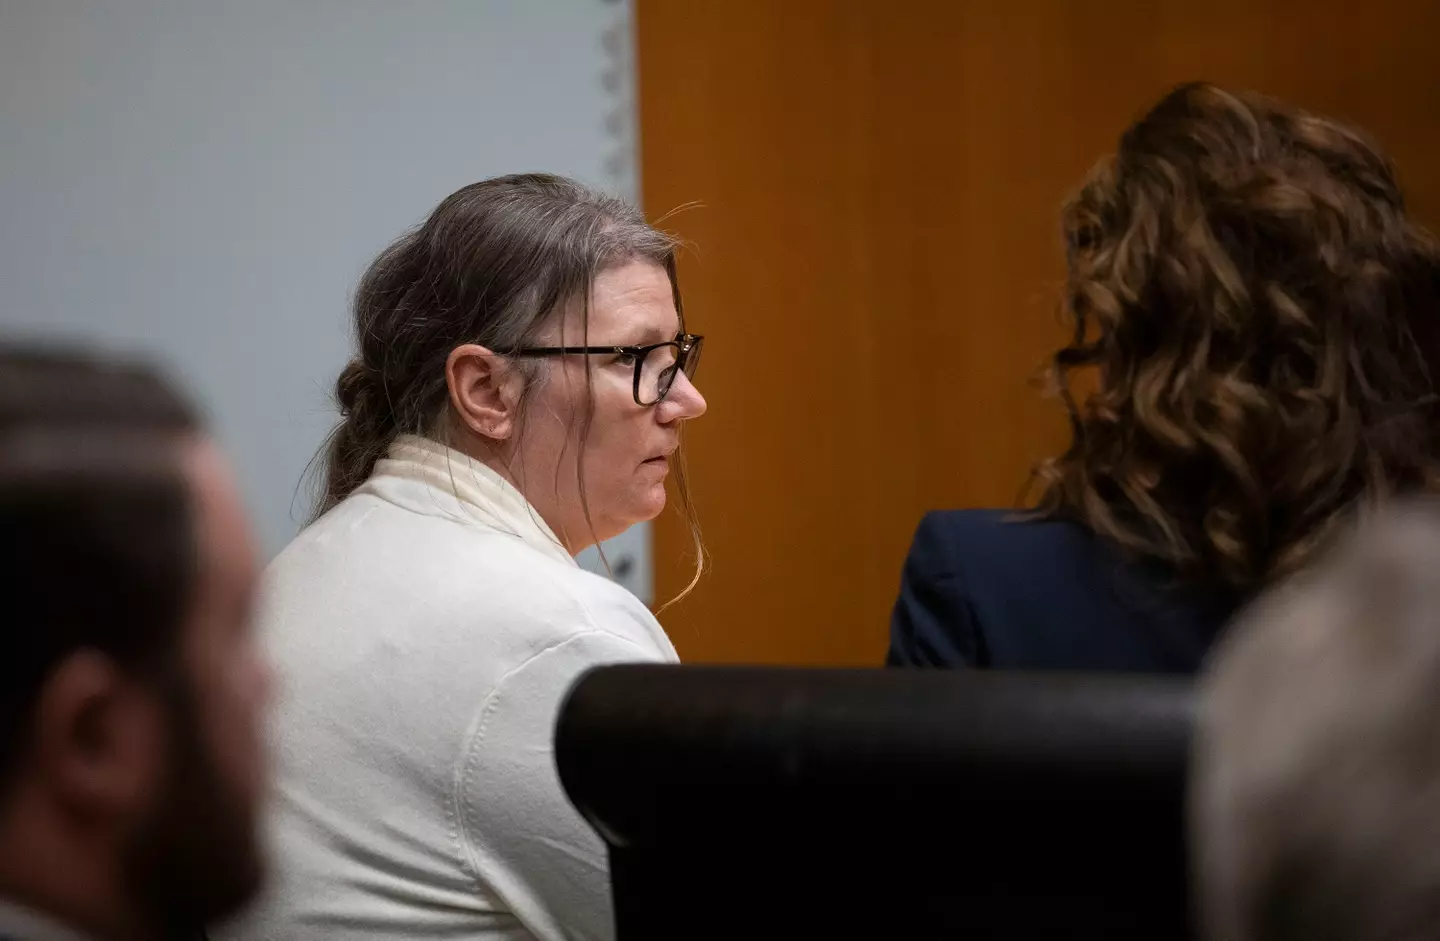 During her trial Jennifer Crumbley said she wished her son had killed her and his dad instead. (Getty Images/ Bill Pugliano)